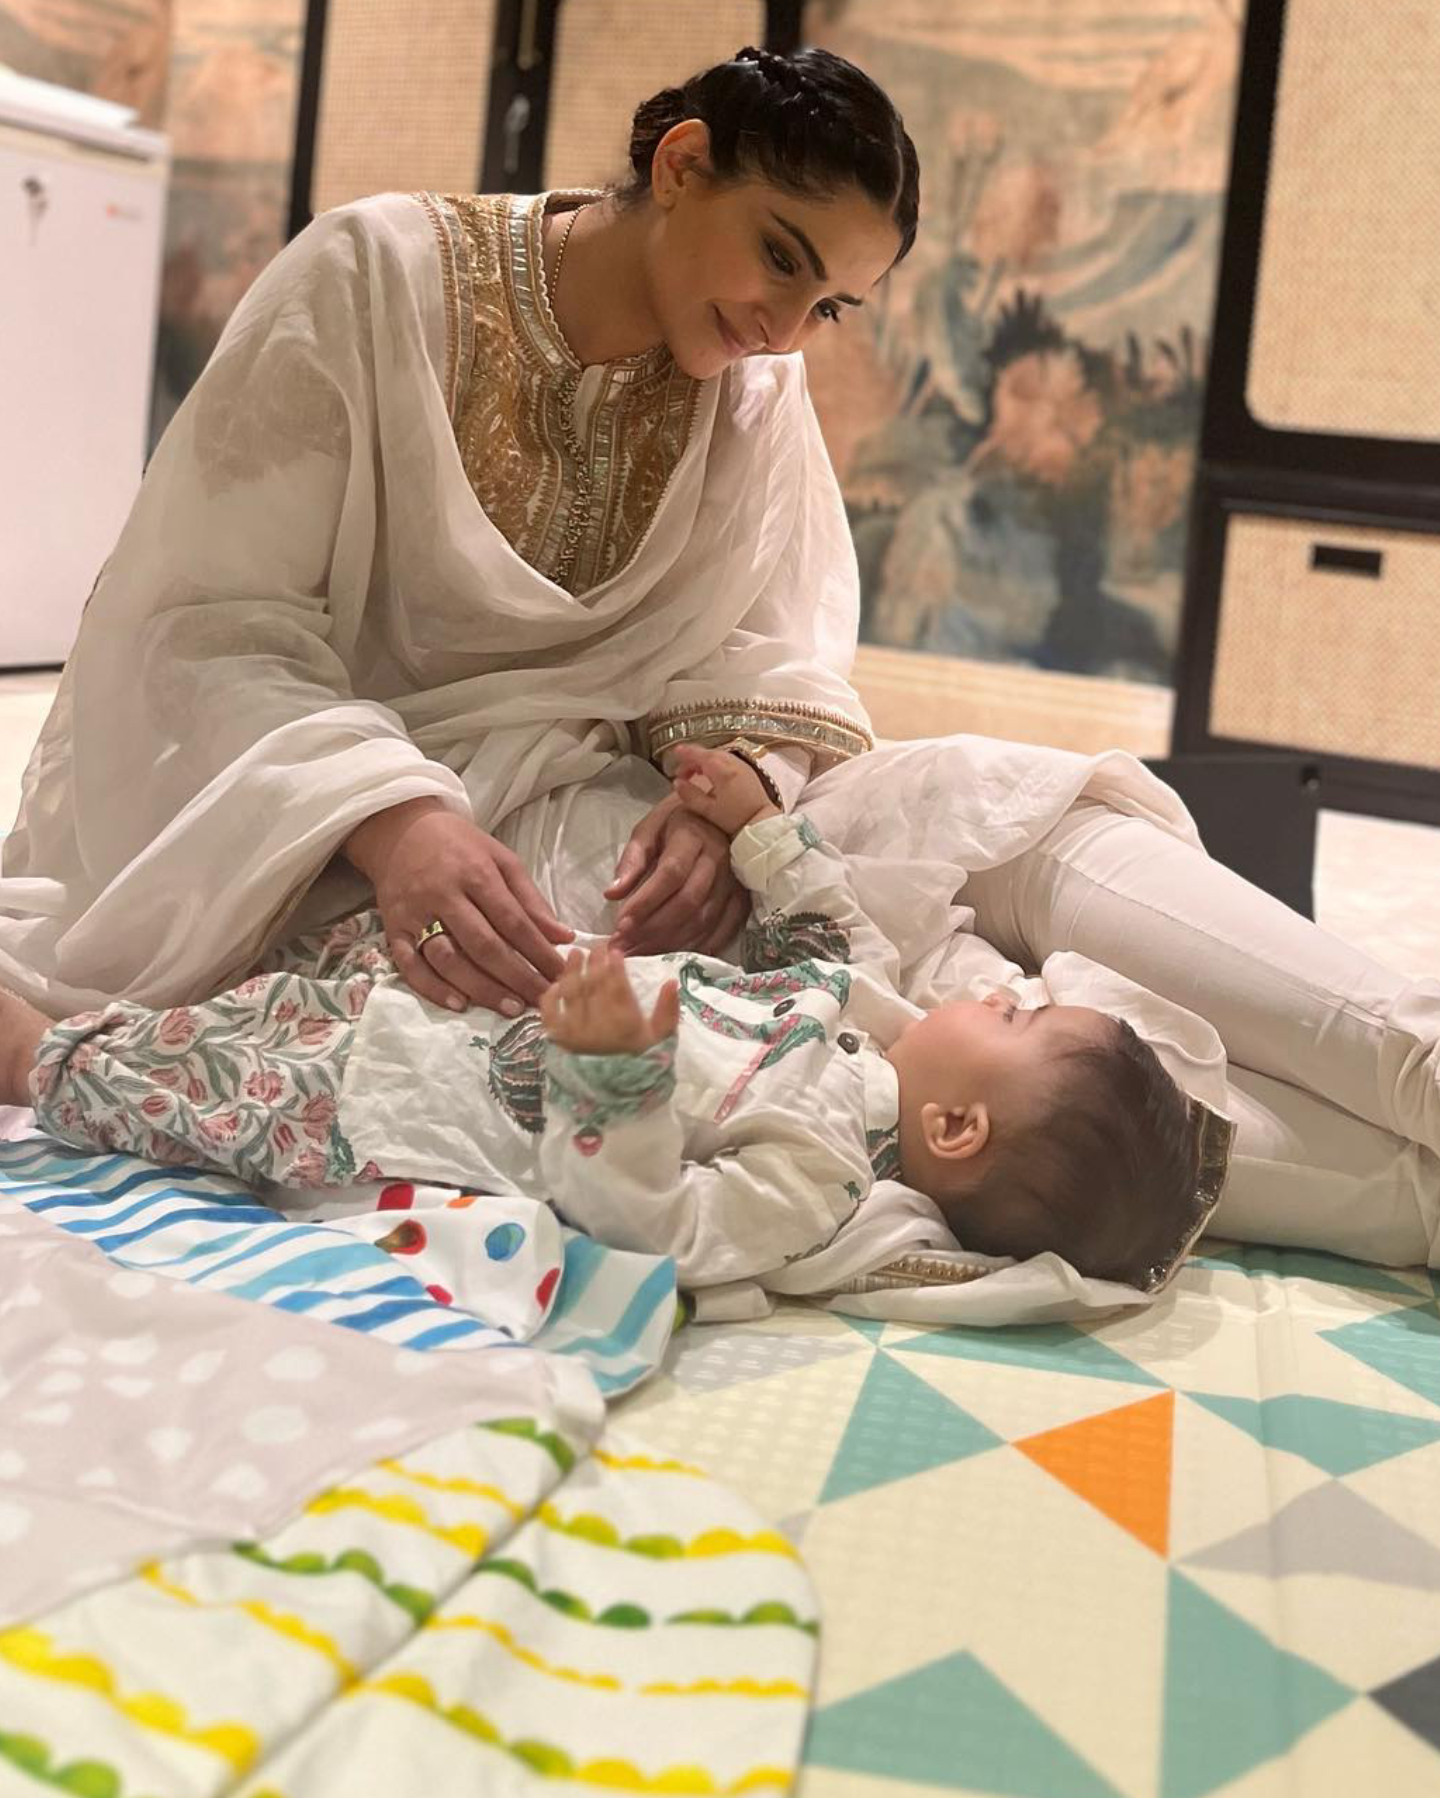 Sonam Kapoor gazing at her son is the best feeling